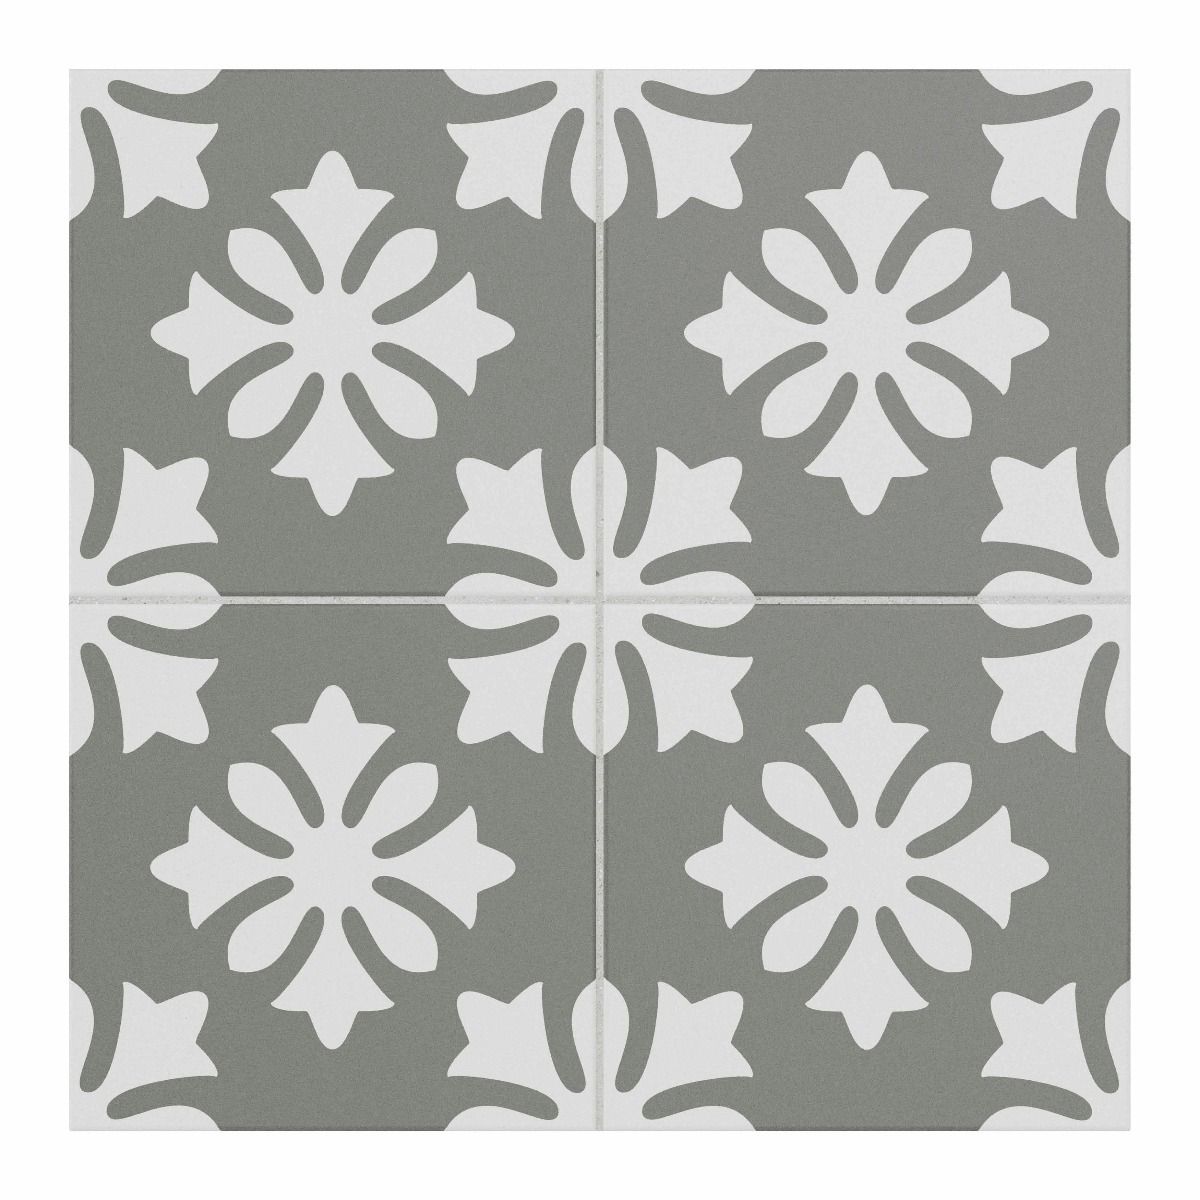 Dali Patterned Ceramic Wall and Floor Tile 25x25cm